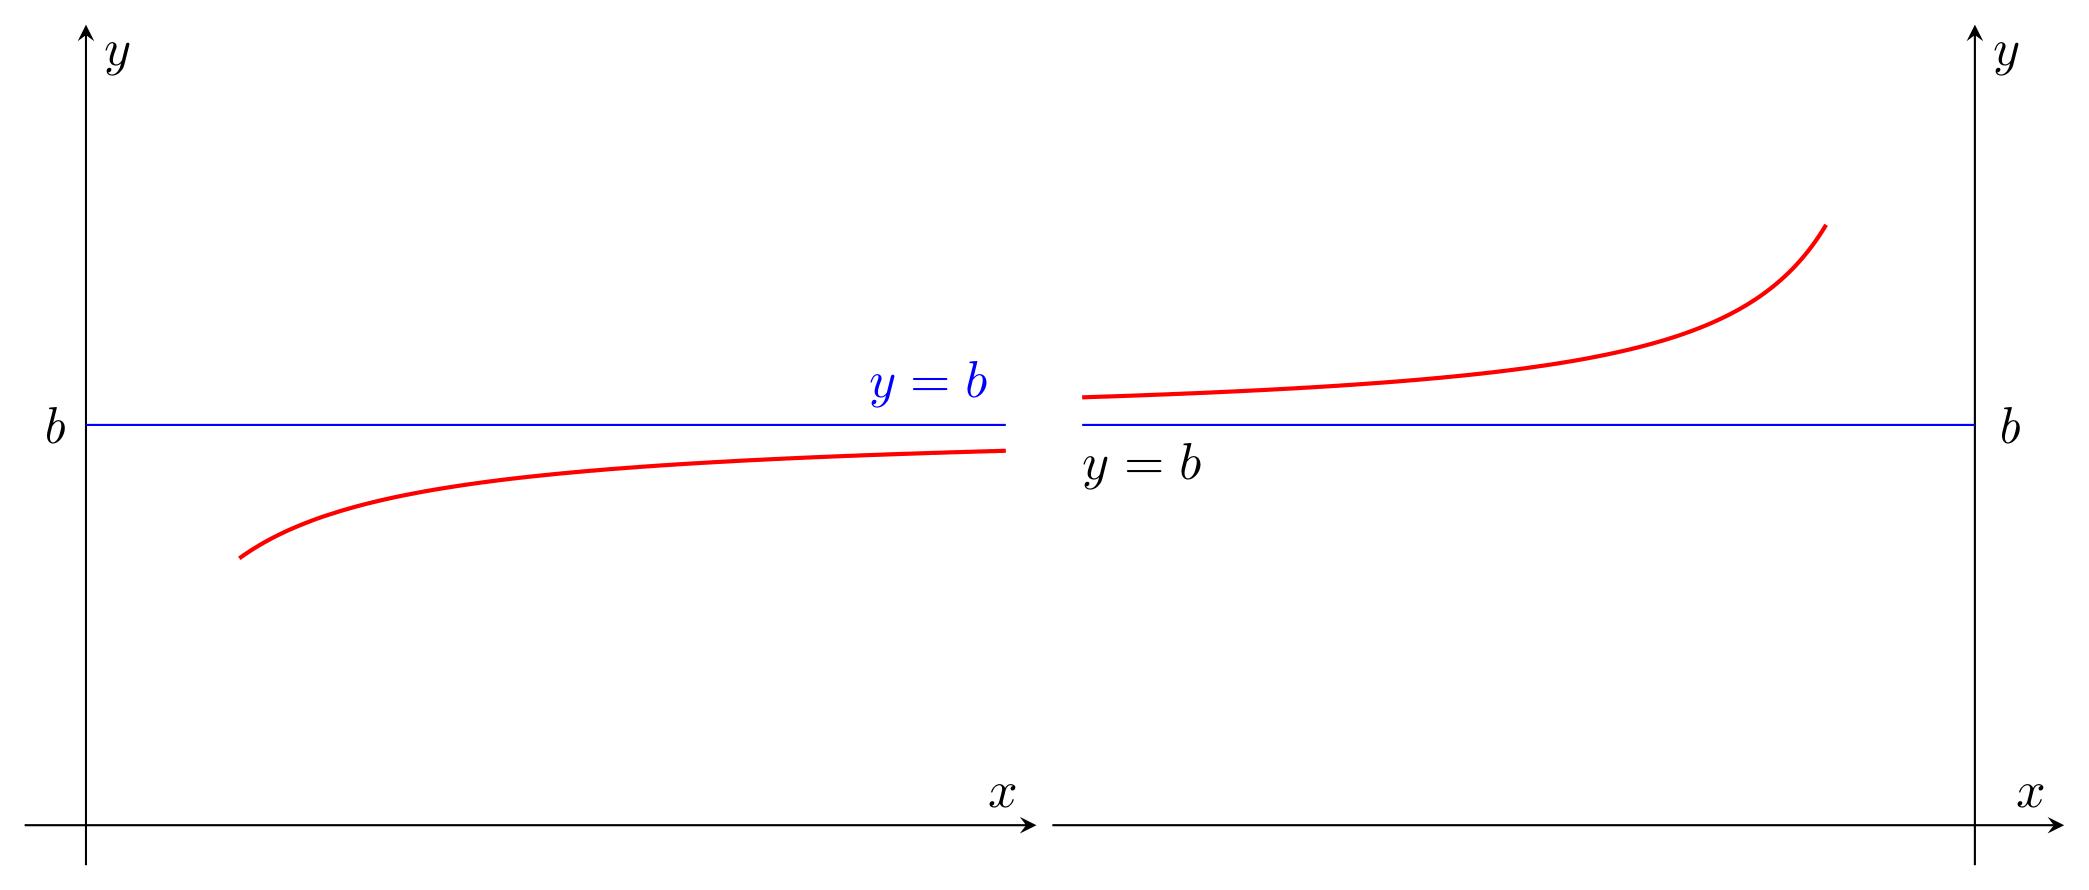 Banner of horizontal asymptotes above and below the curve at + and - infinity